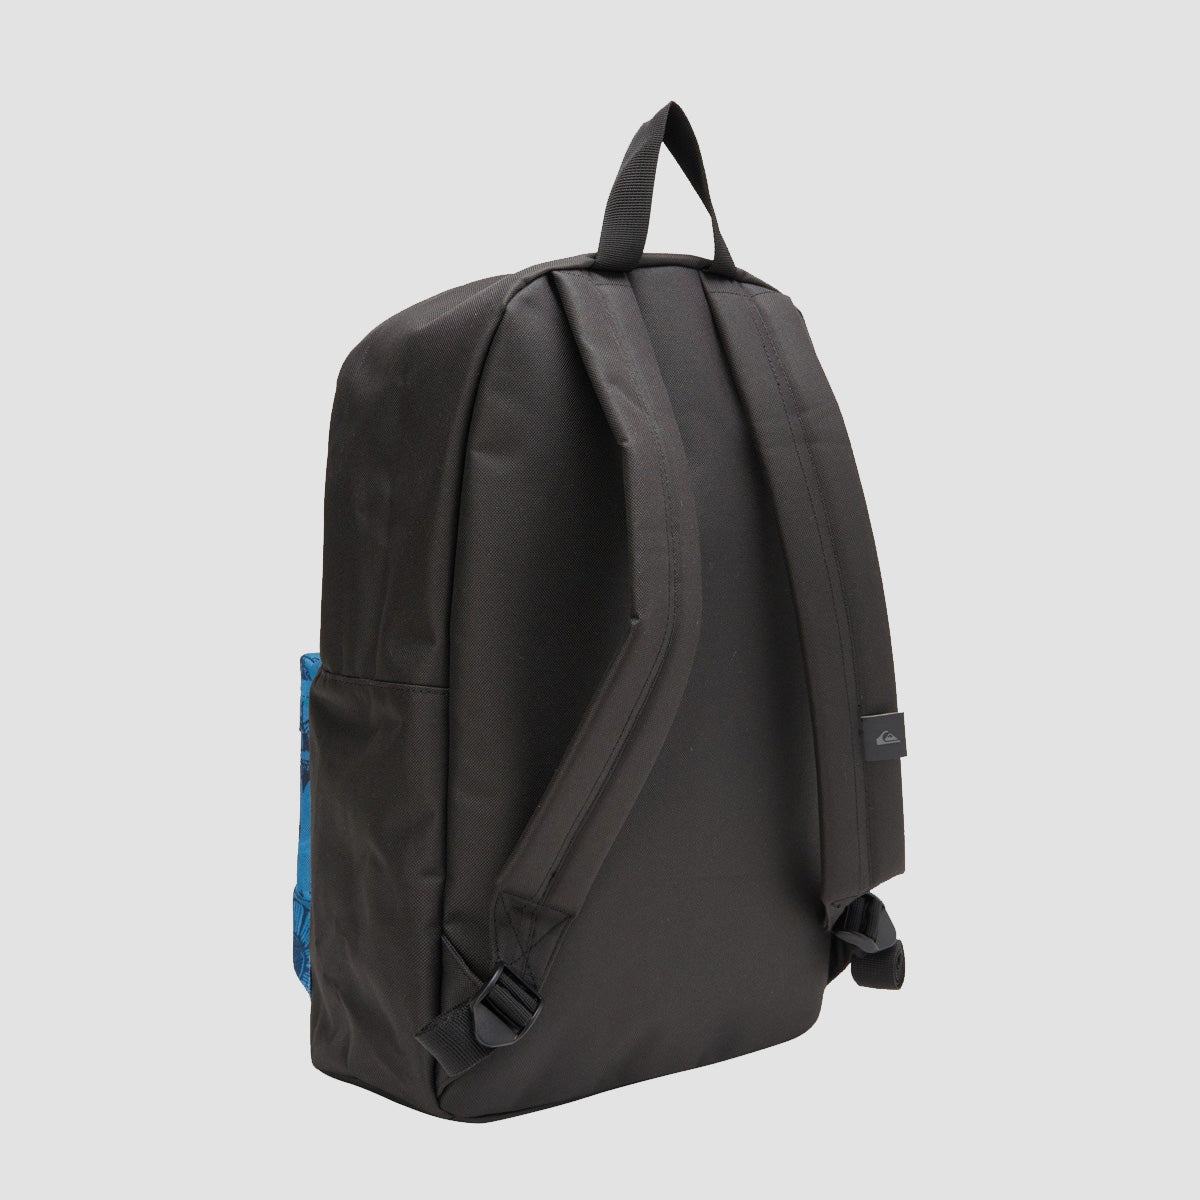 Quiksilver The Poster 26L Backpack Black/Blue